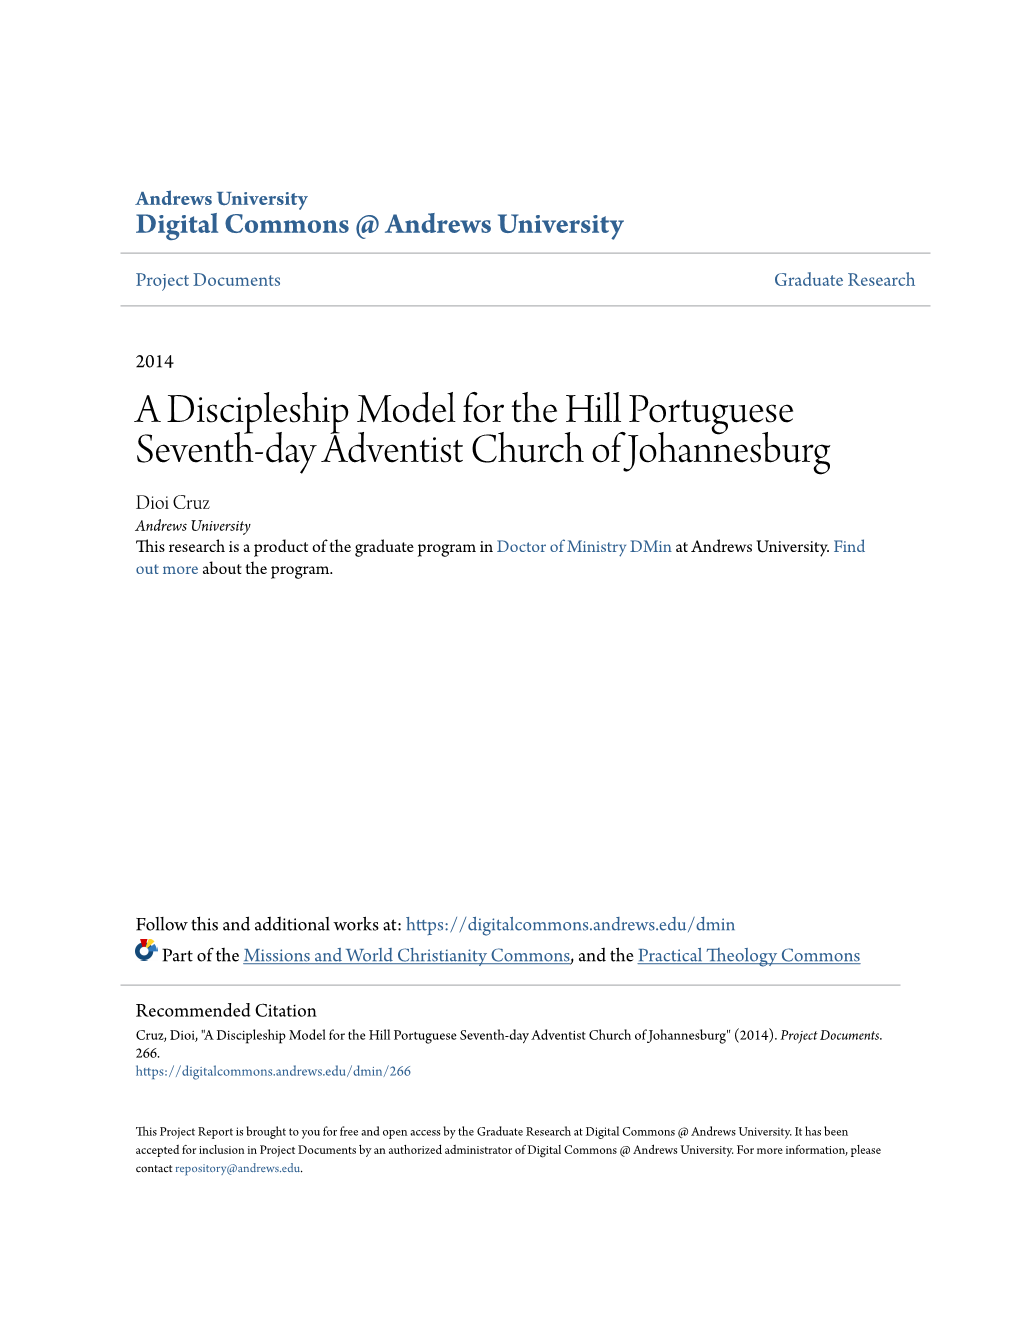 A Discipleship Model for the Hill Portuguese Seventh-Day Adventist Church of Johannesburg